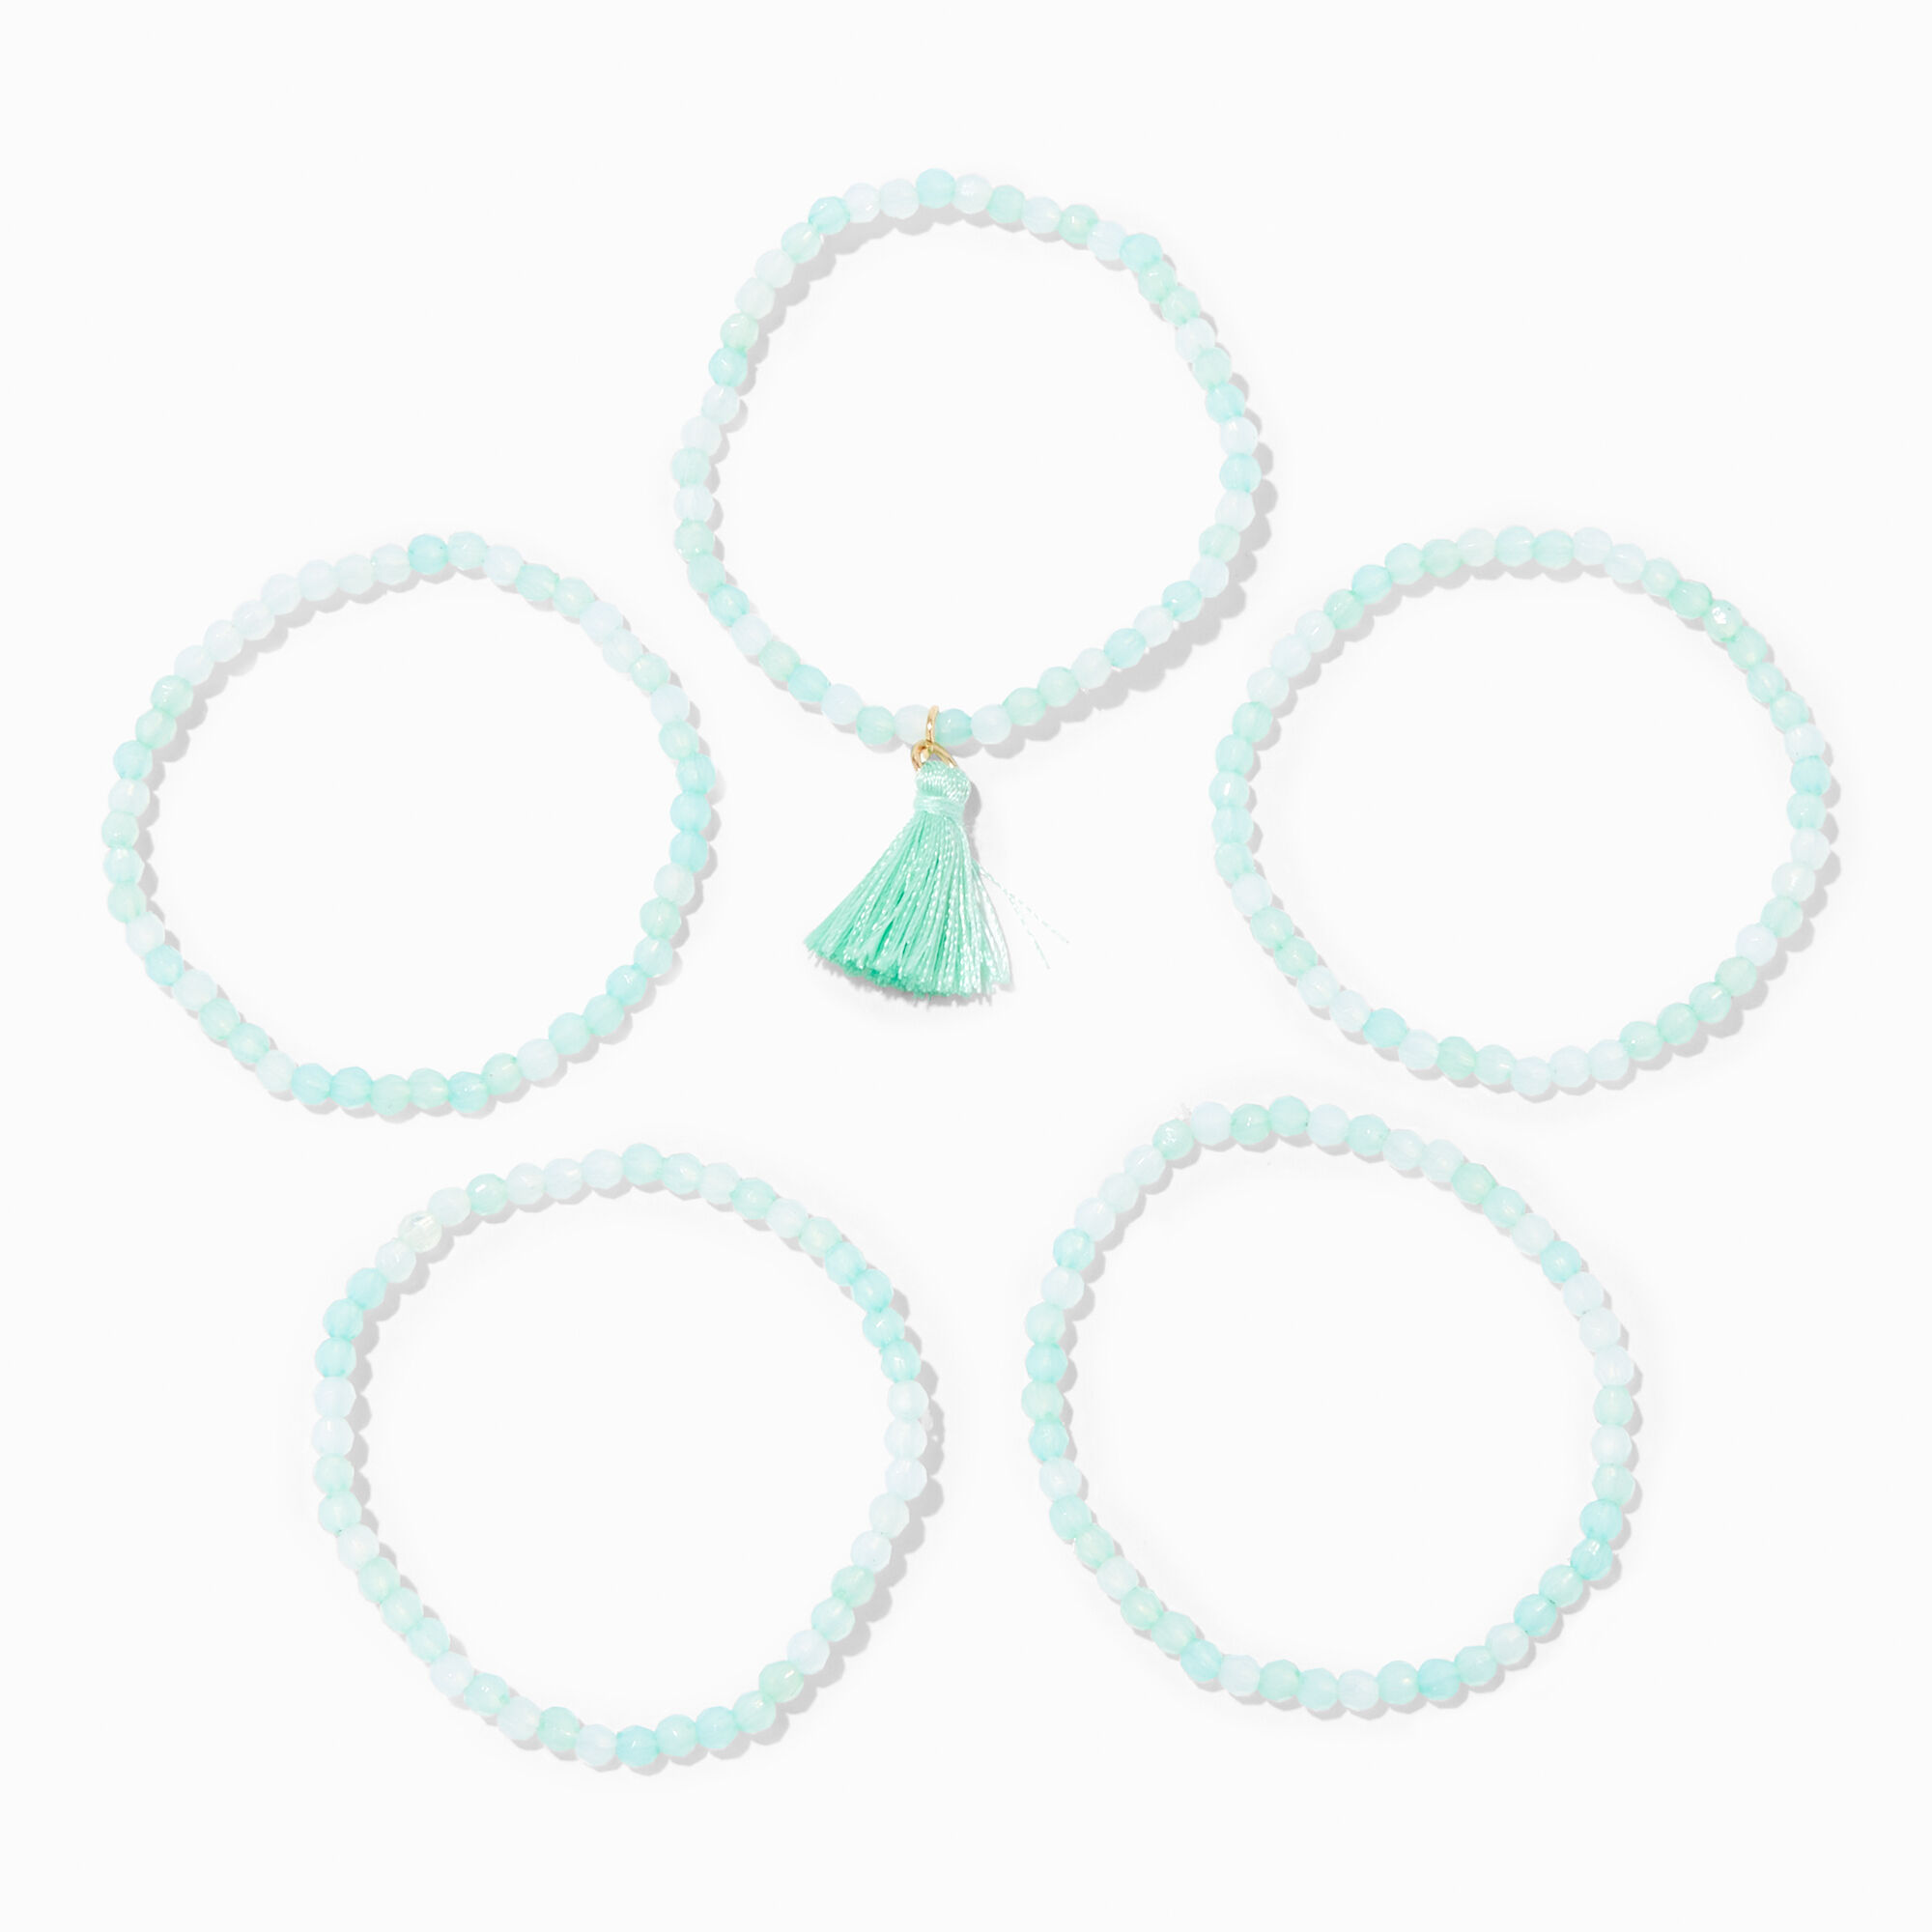 View Claires Tassel Beaded Stretch Bracelets 5 Pack Mint information